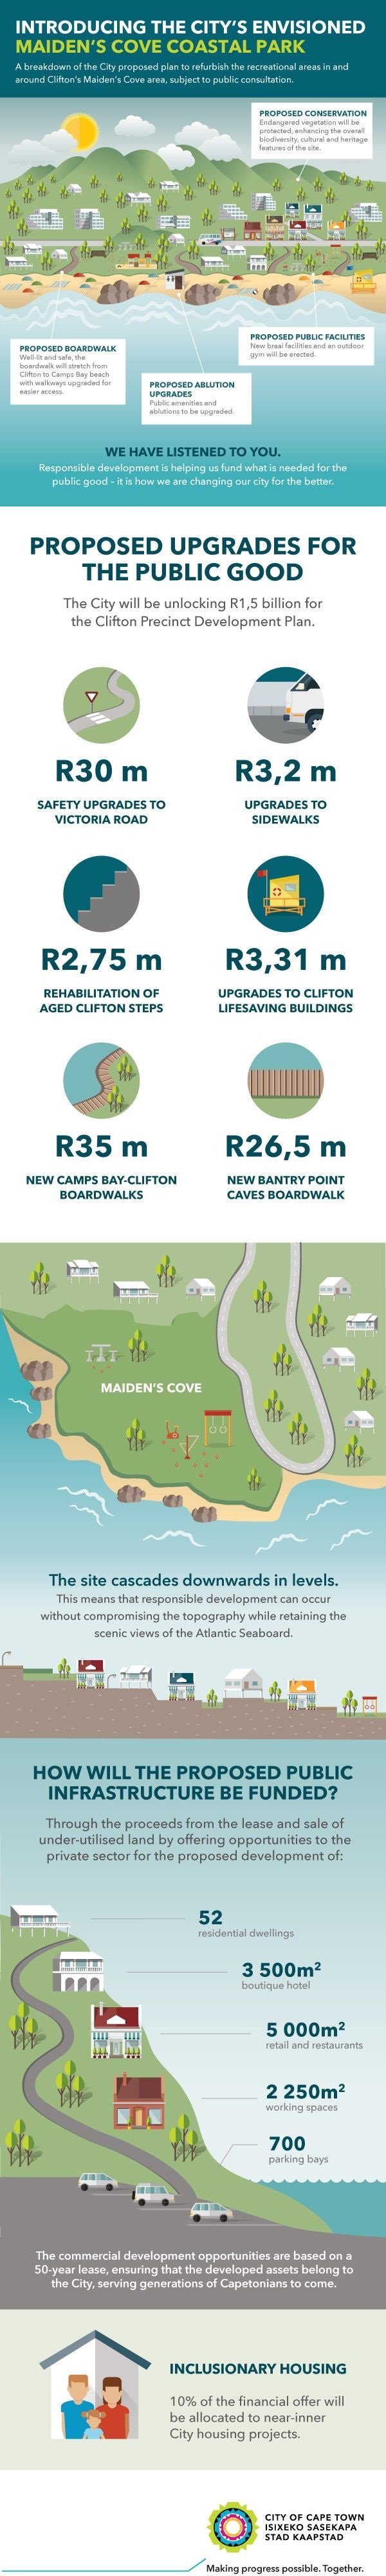 City of Cape Town's Clifton Precinct Development Plan which has been met with outrage by affected parties.